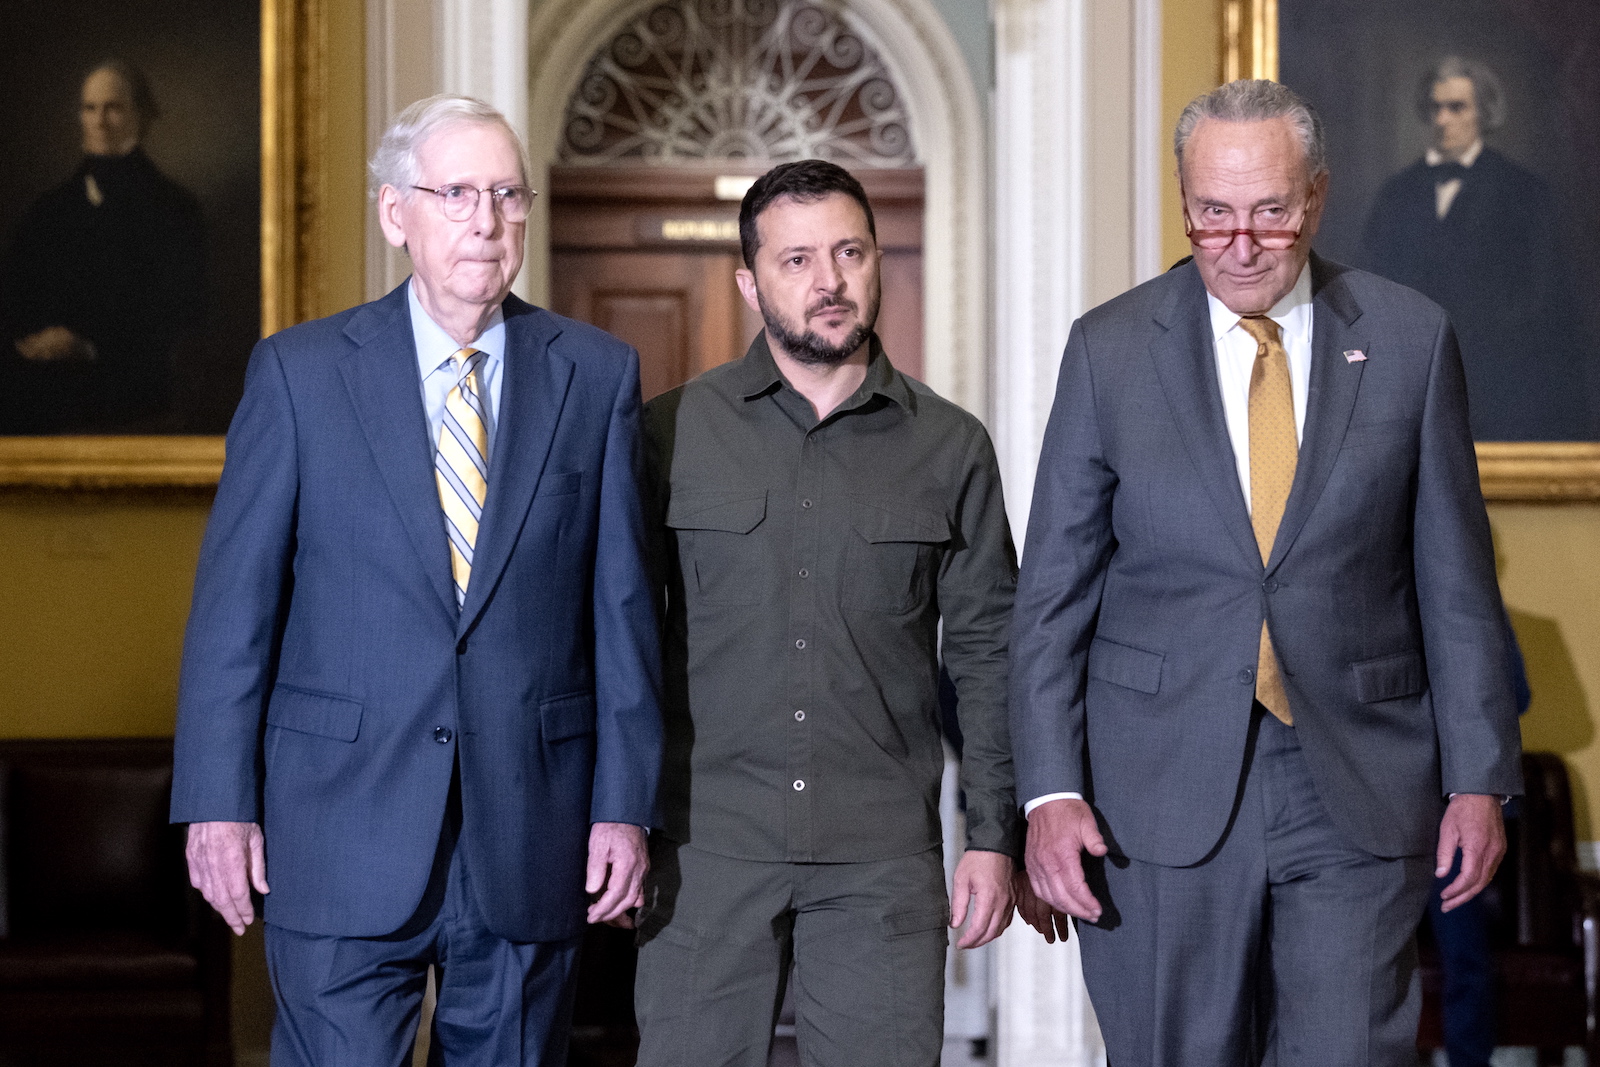 epa10874230 Ukrainian President Volodymyr Zelensky (C) walks with US Senate Minority Leader Mitch McConnell (L) and US Senate Majority Leader Chuck Schumer (R) before meeting with members of the US Senate on Capitol Hill in Washington, DC, USA, 21 September 2023. Ukrainian President Zelensky is in Washington to meet with members of Congress at the US Capitol, the Pentagon and US President Joe Biden at the White House to make a case for further military aid.  EPA/MICHAEL REYNOLDS